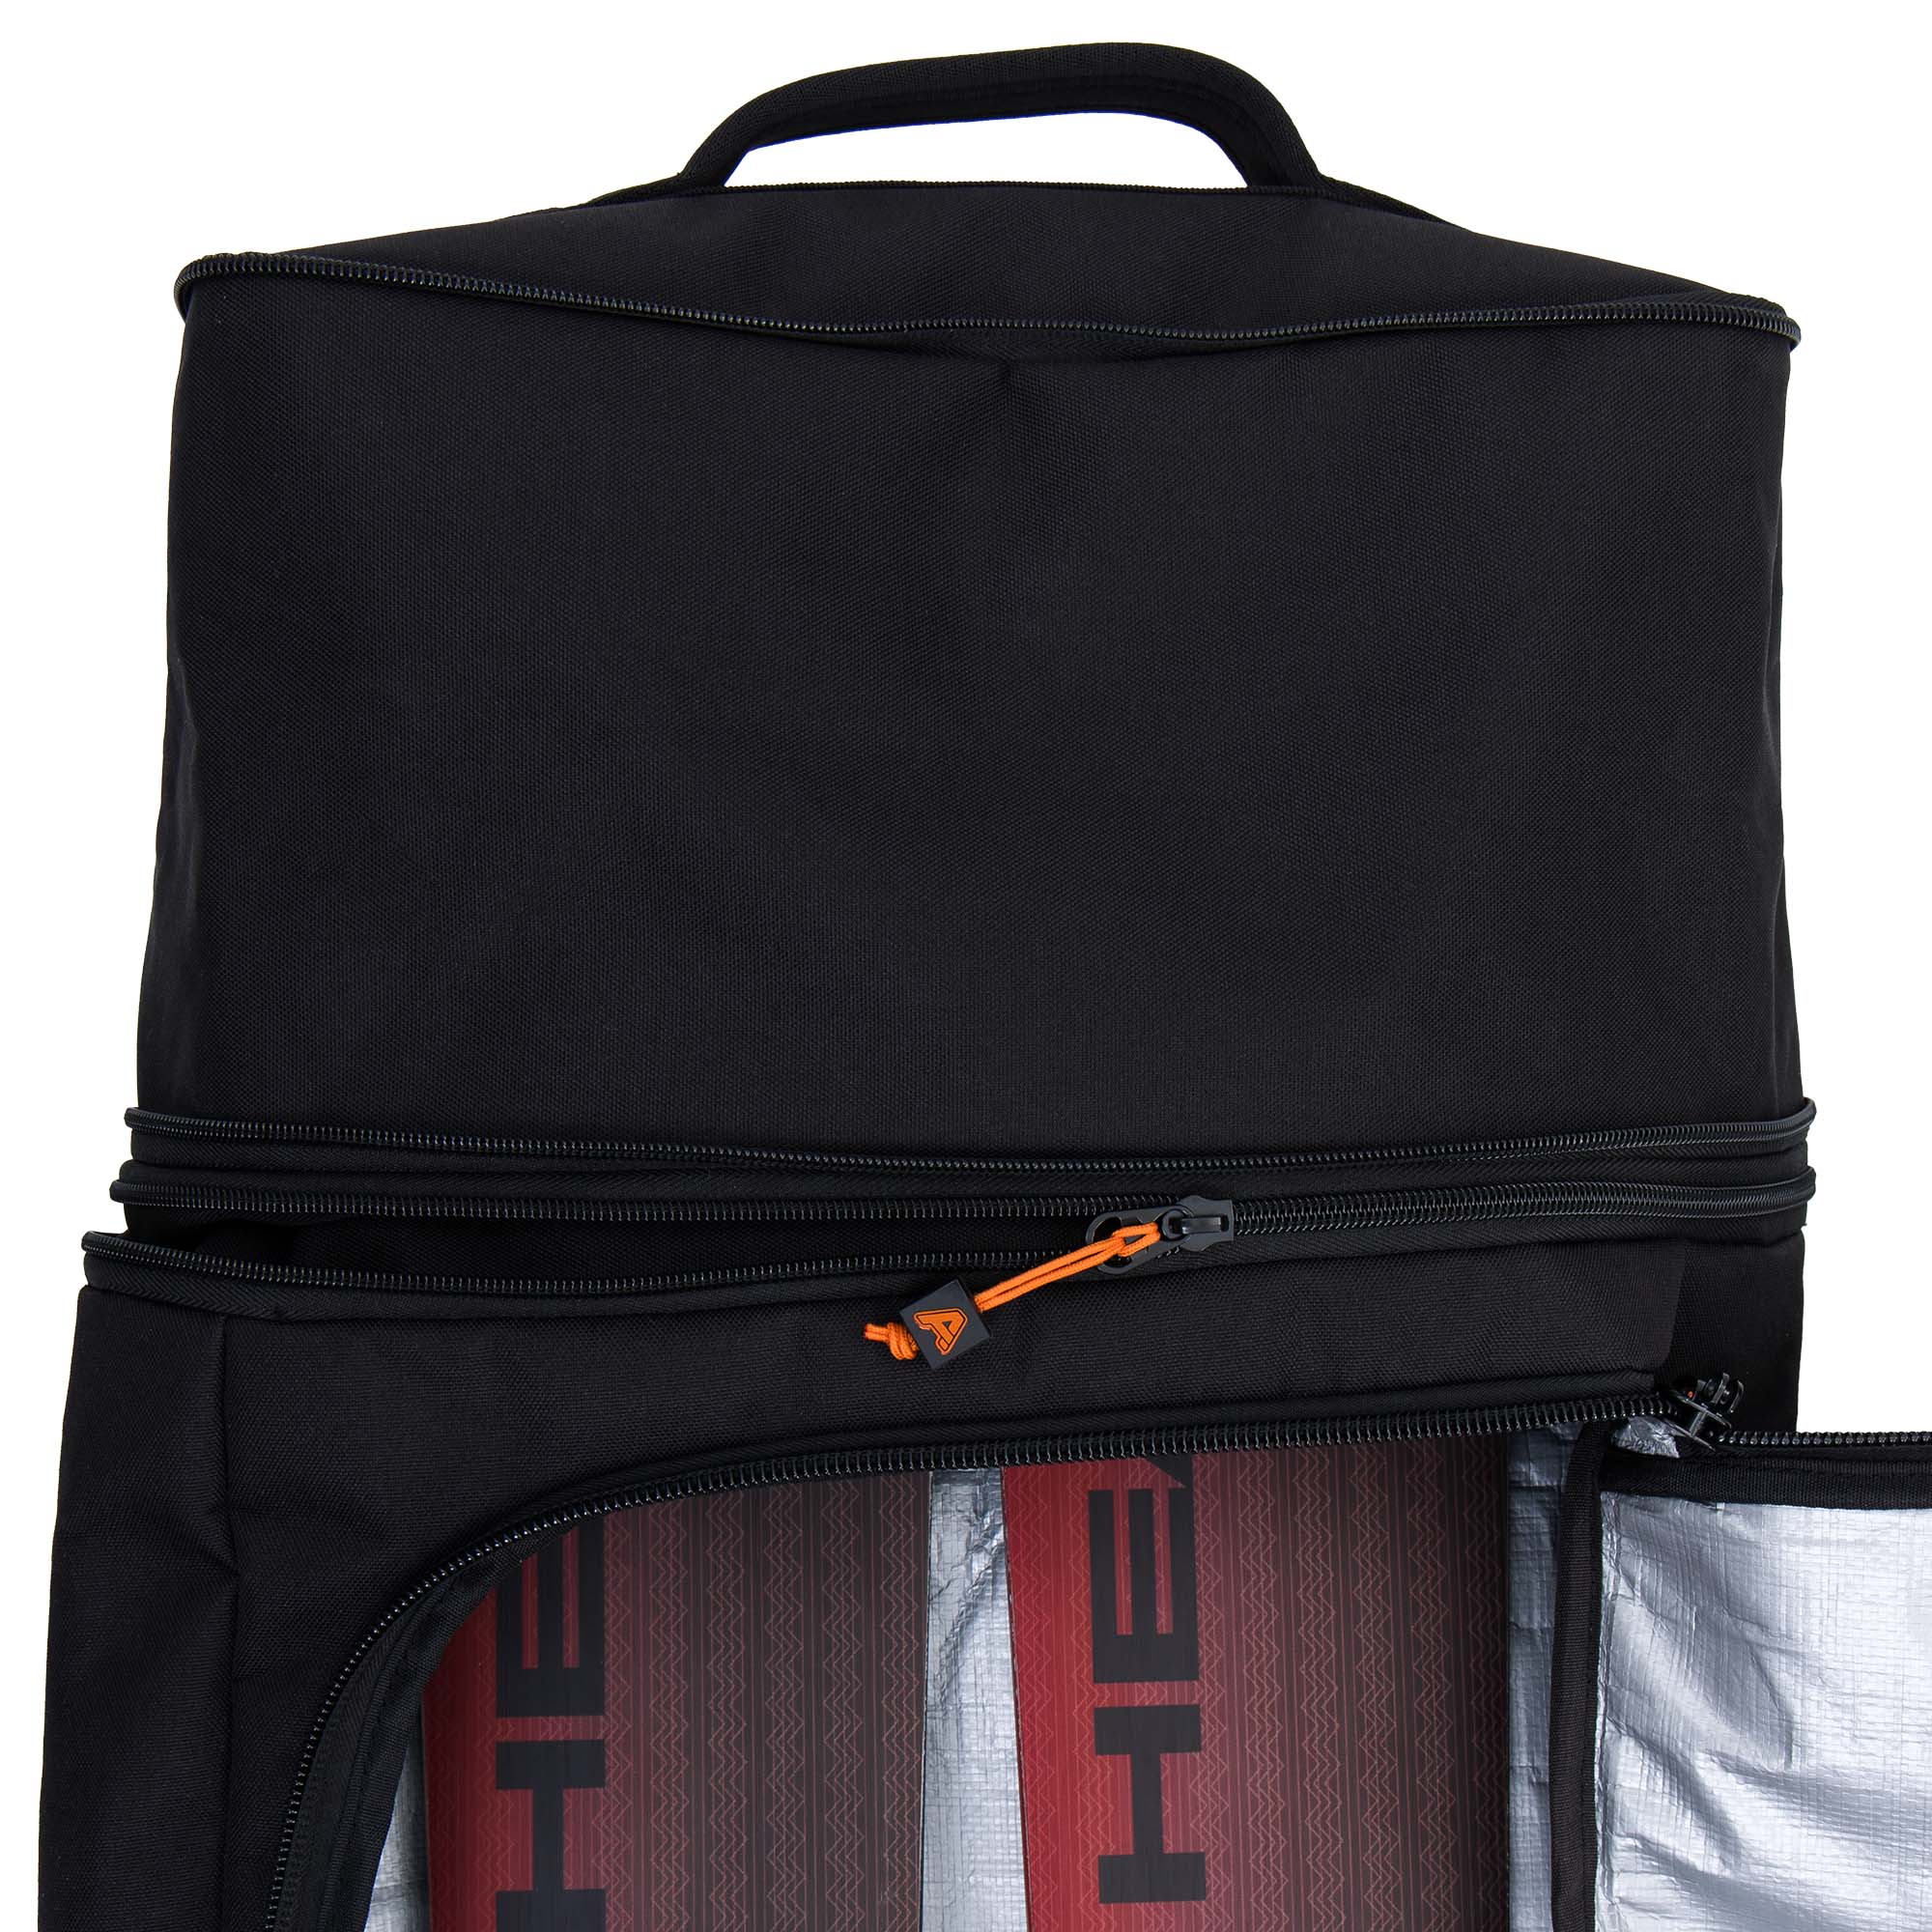 Absolute Expandable Roller Ski/Snowboard Wheeled Travel Bag